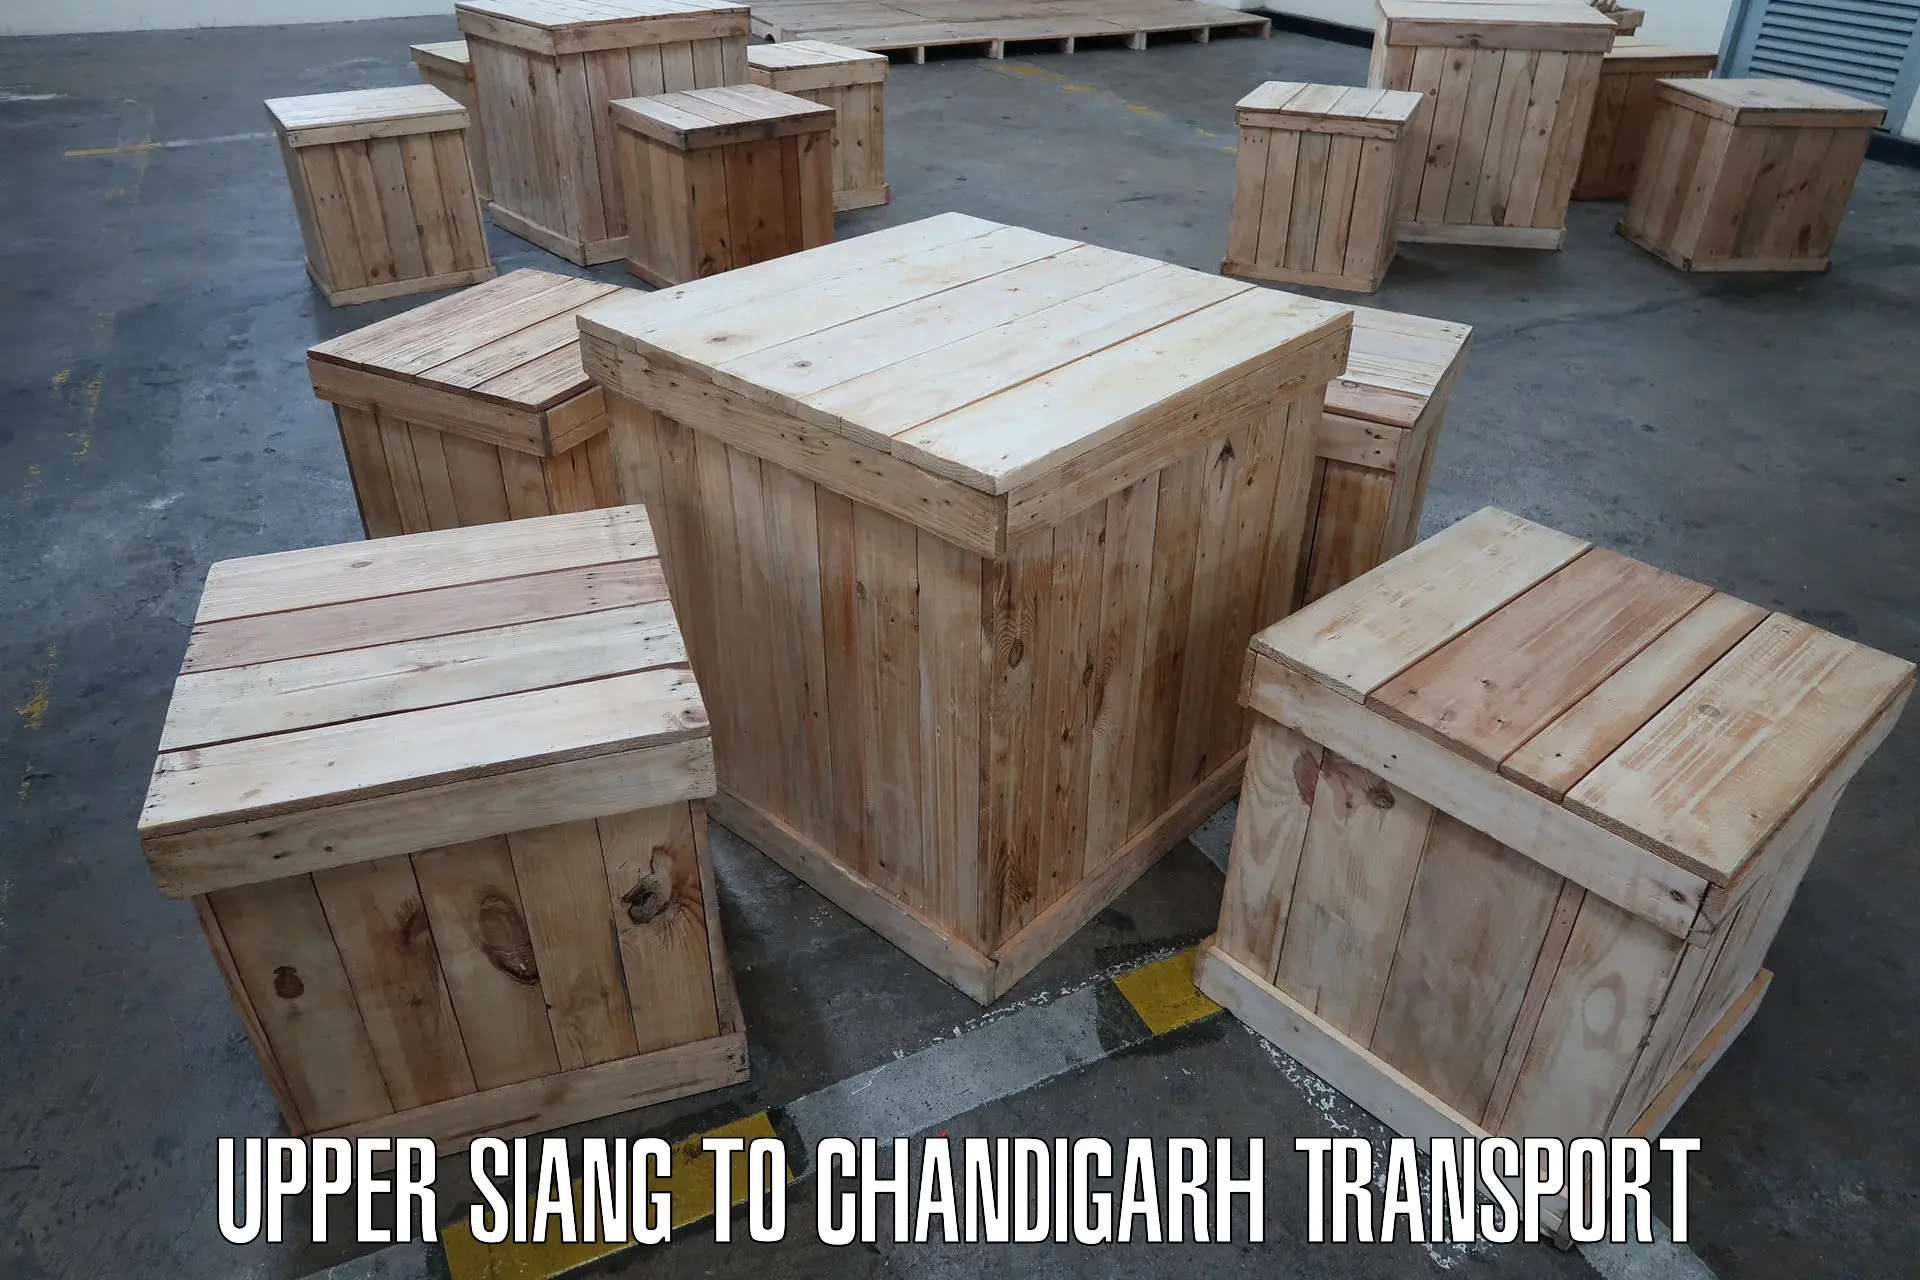 Cargo train transport services Upper Siang to Chandigarh